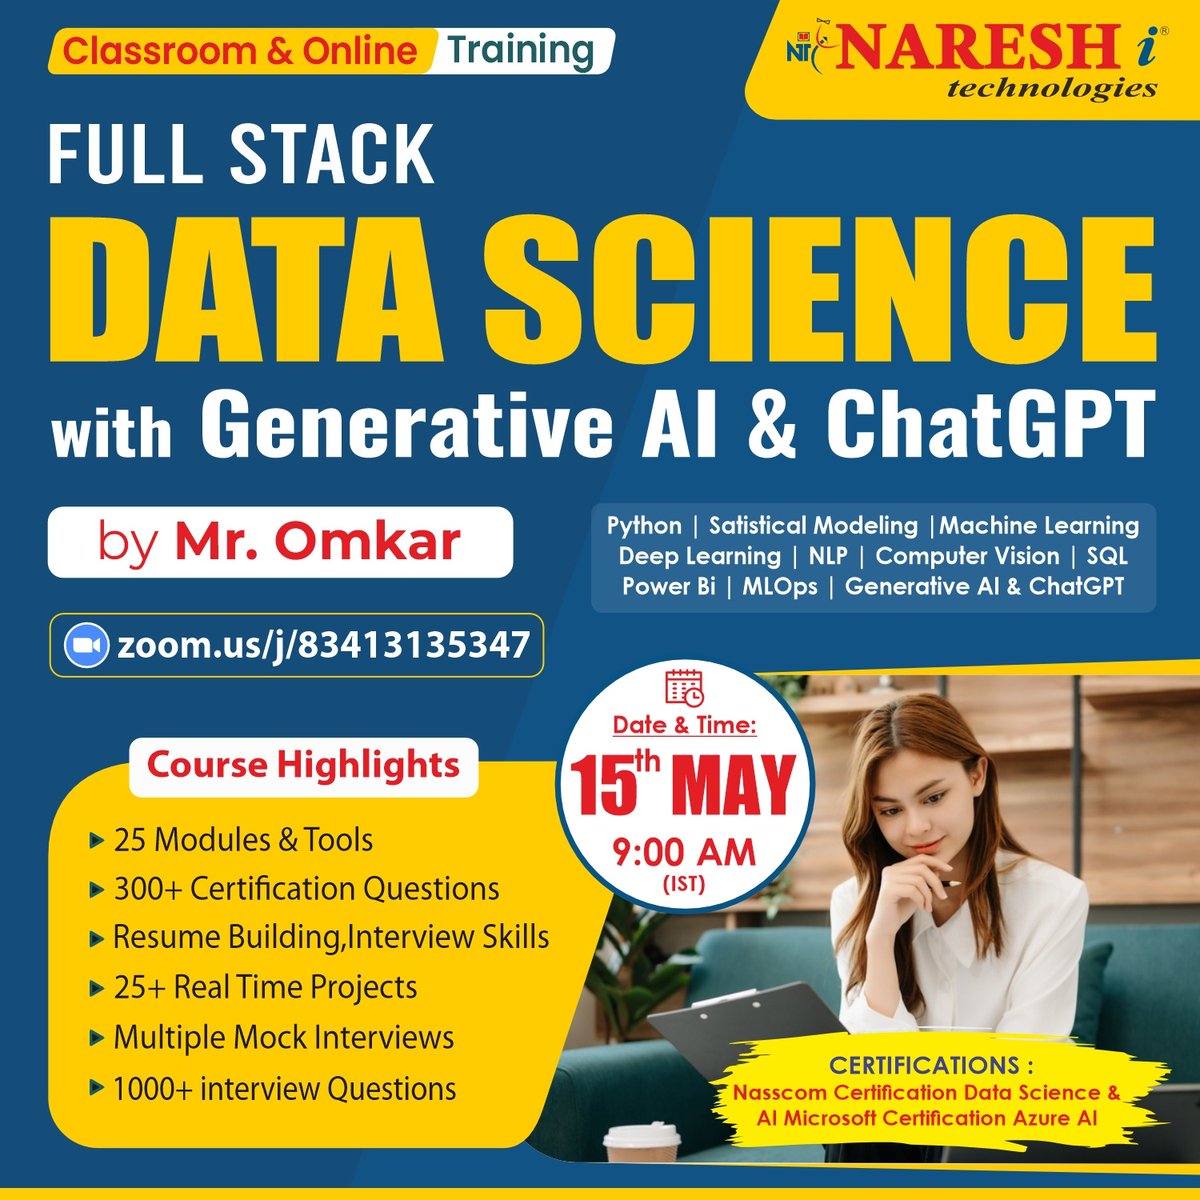 ✍️Enroll Now: bit.ly/3wlX61V
👉Attend a Free Demo On Full Stack Data Science & AI by Mr.Omkar.
📅Demo On: 15th May @ 9:00 AM (IST)

#Fullstackdatascience #ai #machinelearning #python #chatgpt #sql #Database #Dataanalyst #it #azure #onlinetraining #classroomtraining